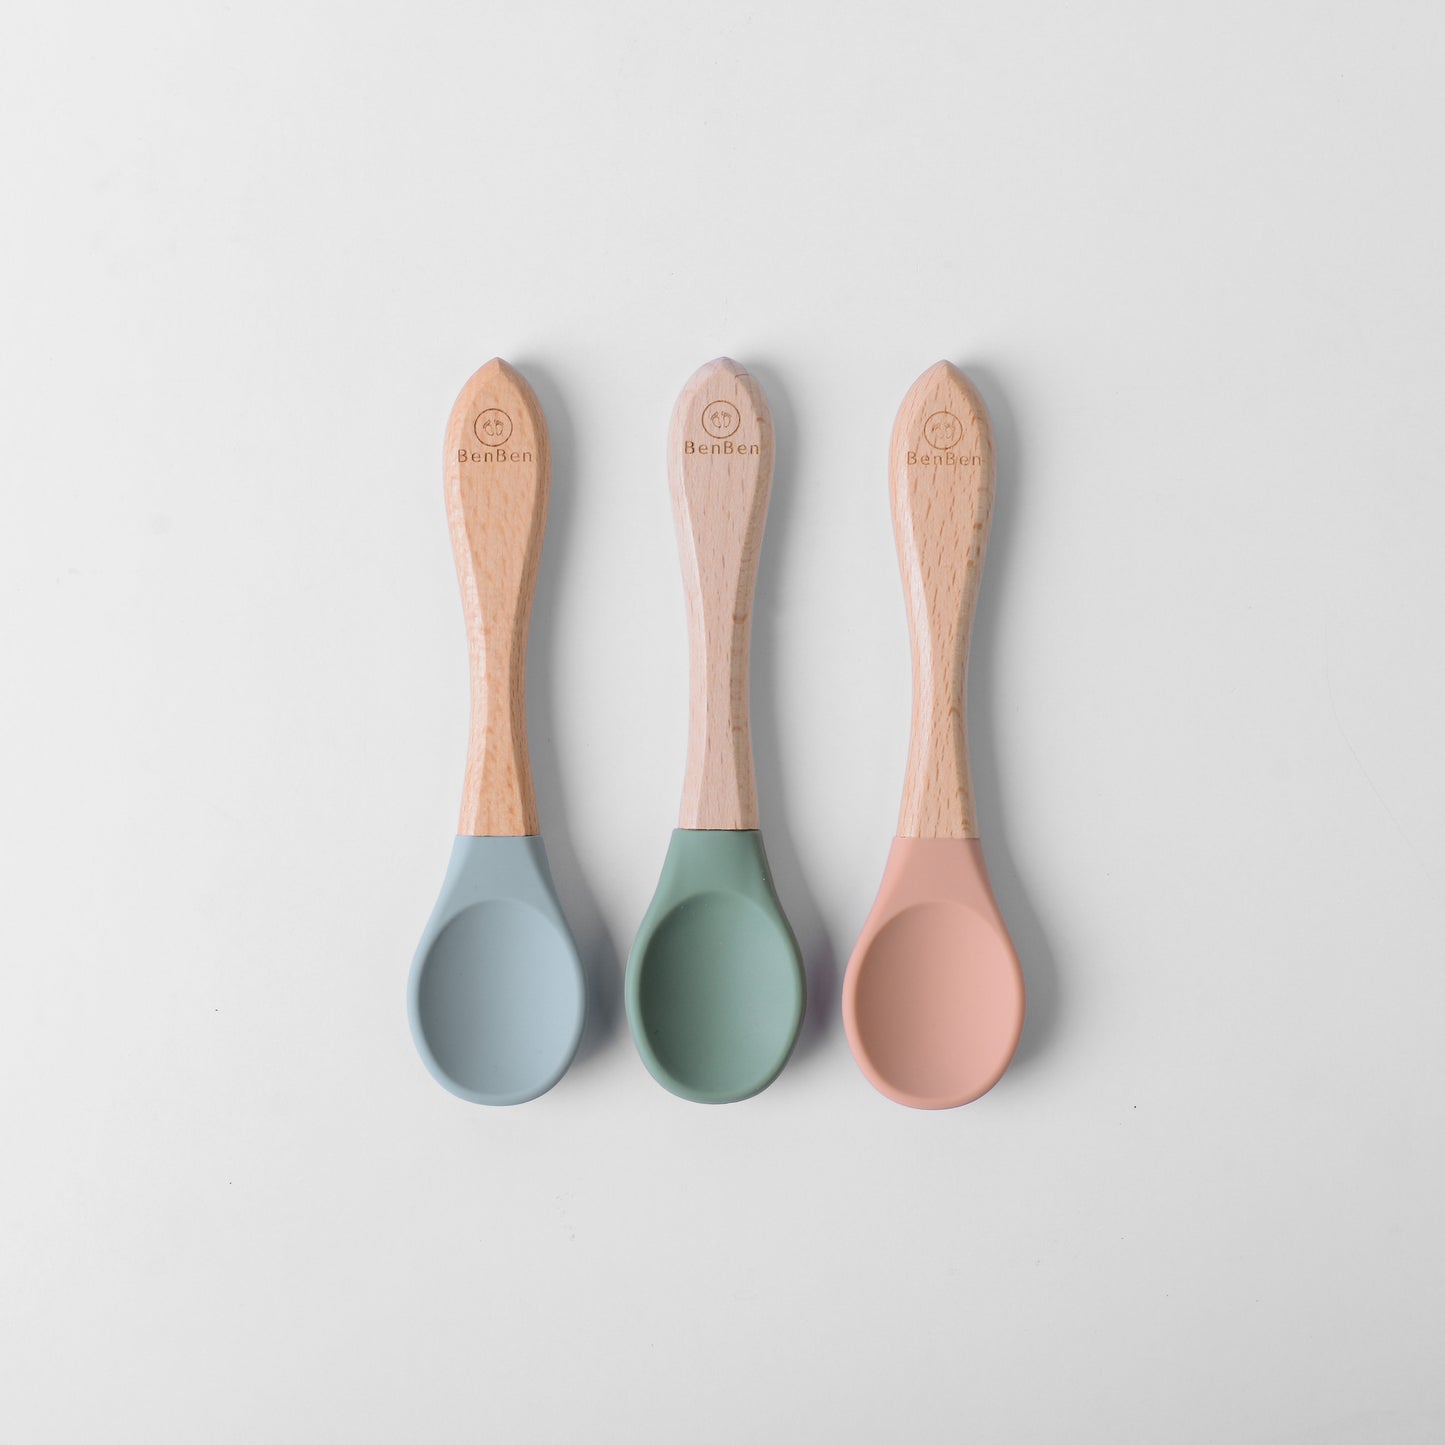 Bamboo Spoon & Fork